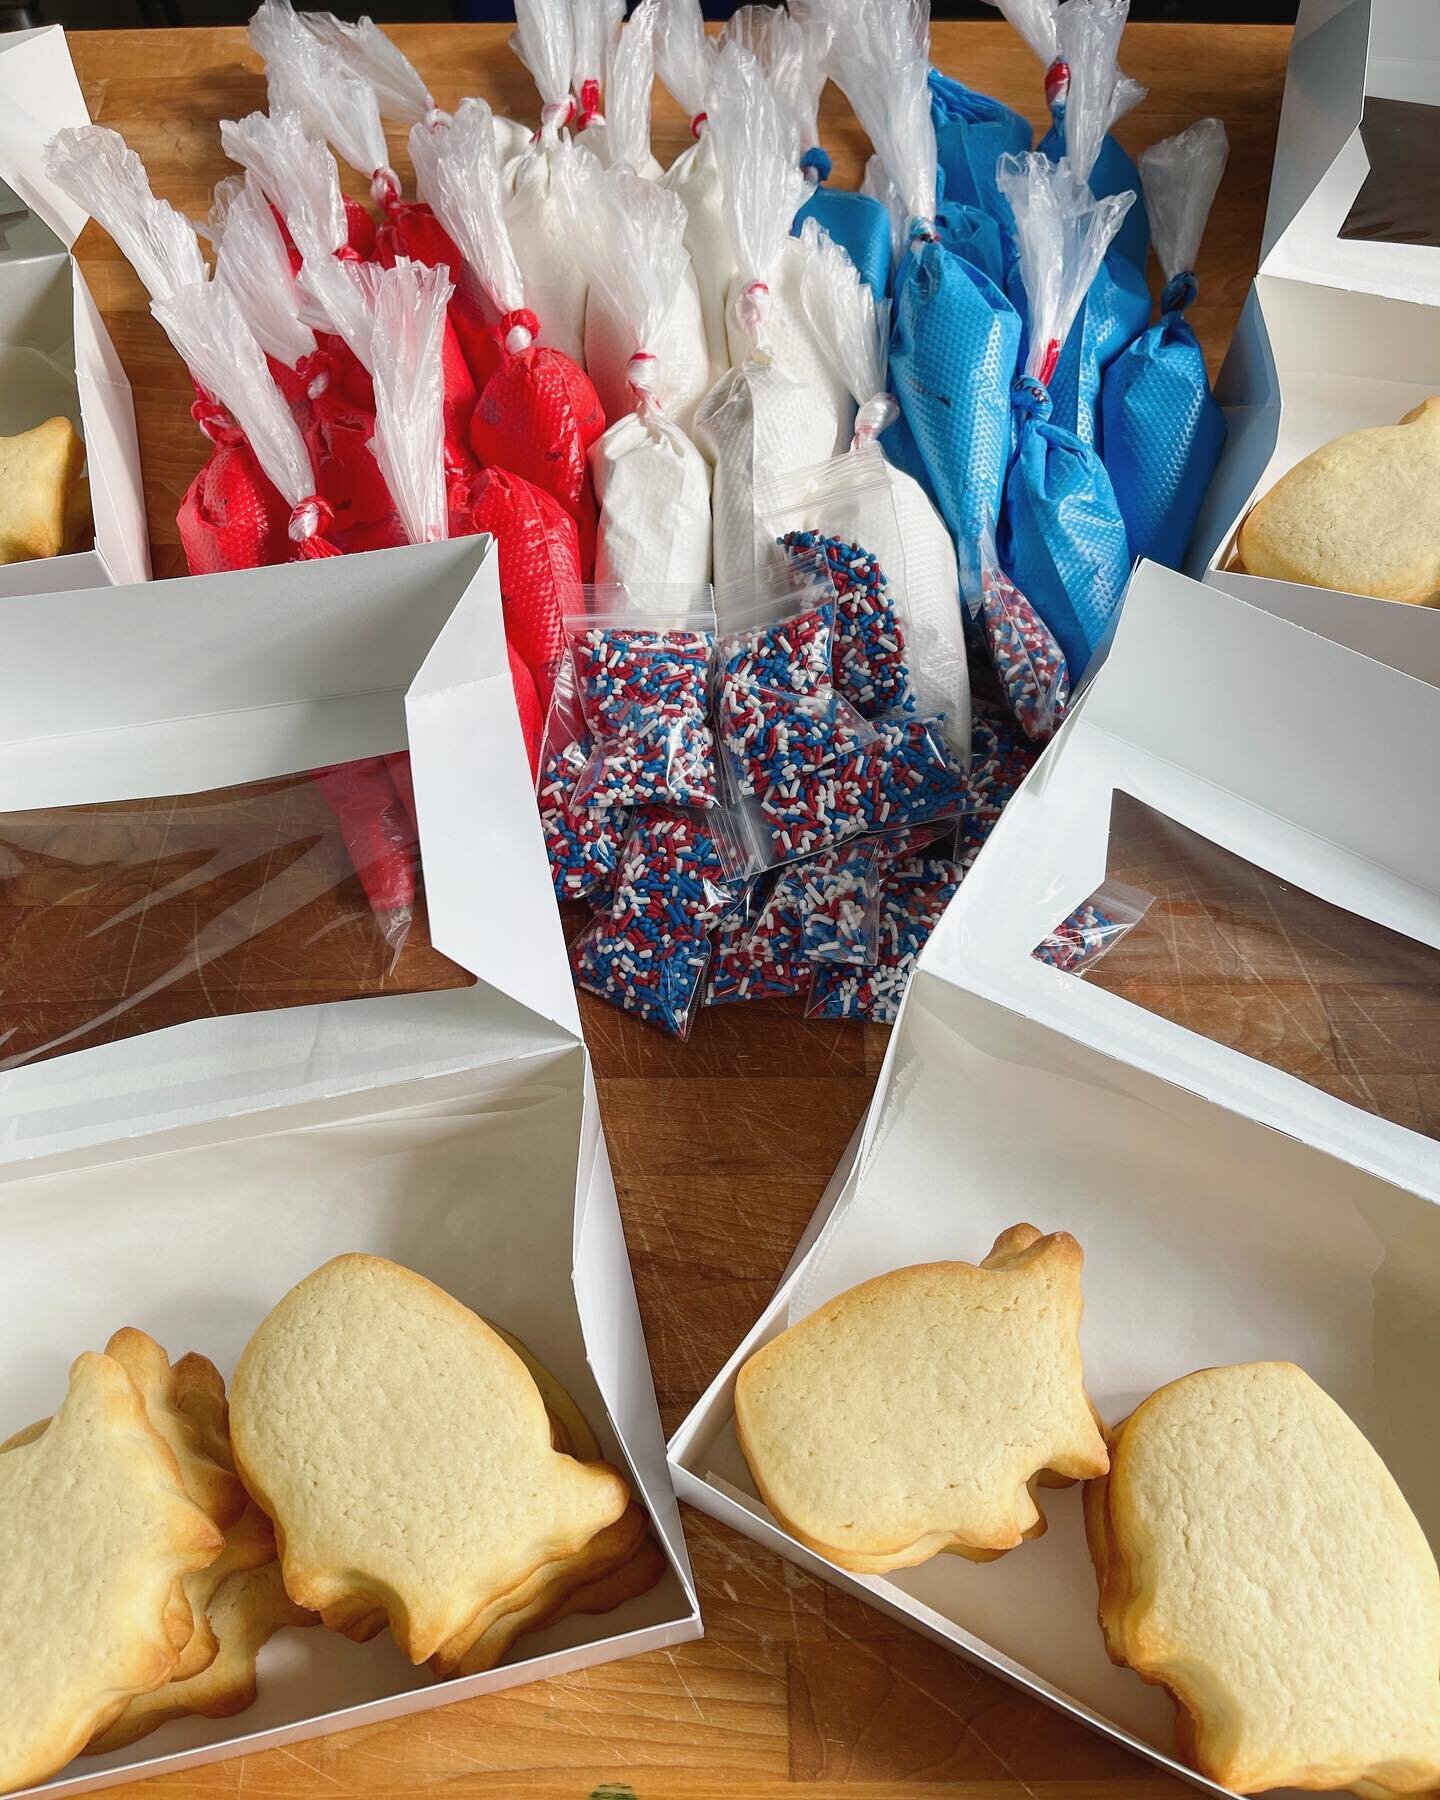 Add our DIY July 4th cookie kits to your celebrations! ❤️🤍💙 

Each kit includes 8 cookies, 3 bags of Royal icing and 2 bags of sprinkles. Kits are available to be purchased in store or over the phone. We recommend calling ahead to purchase as we ha